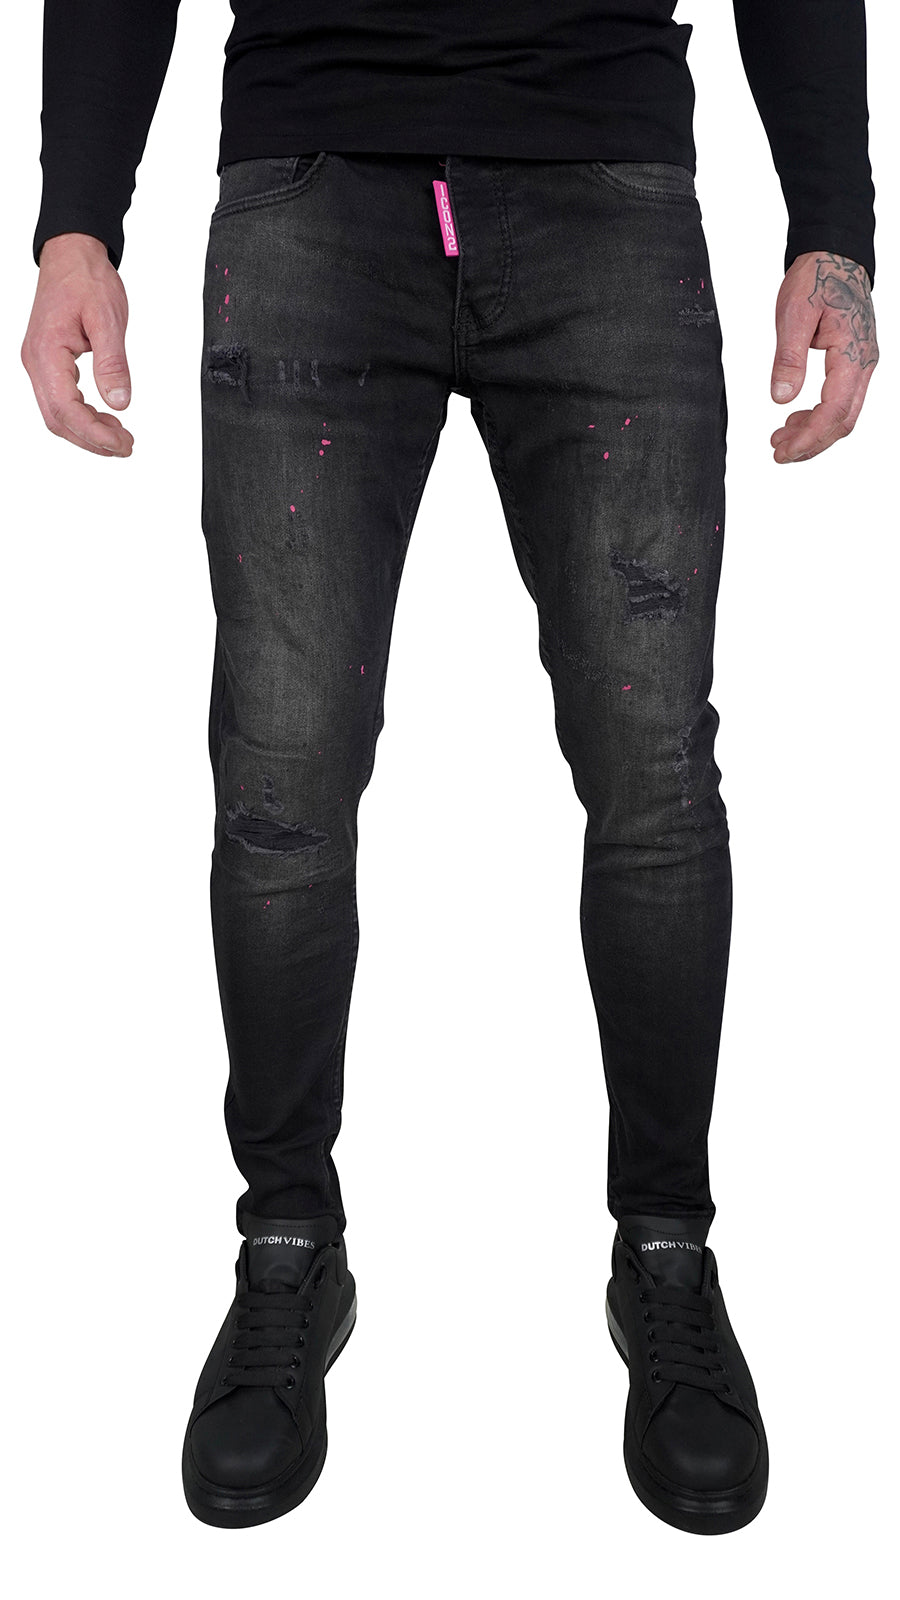 THE ICON PINK SPATTED JEANS - DARK GRAY